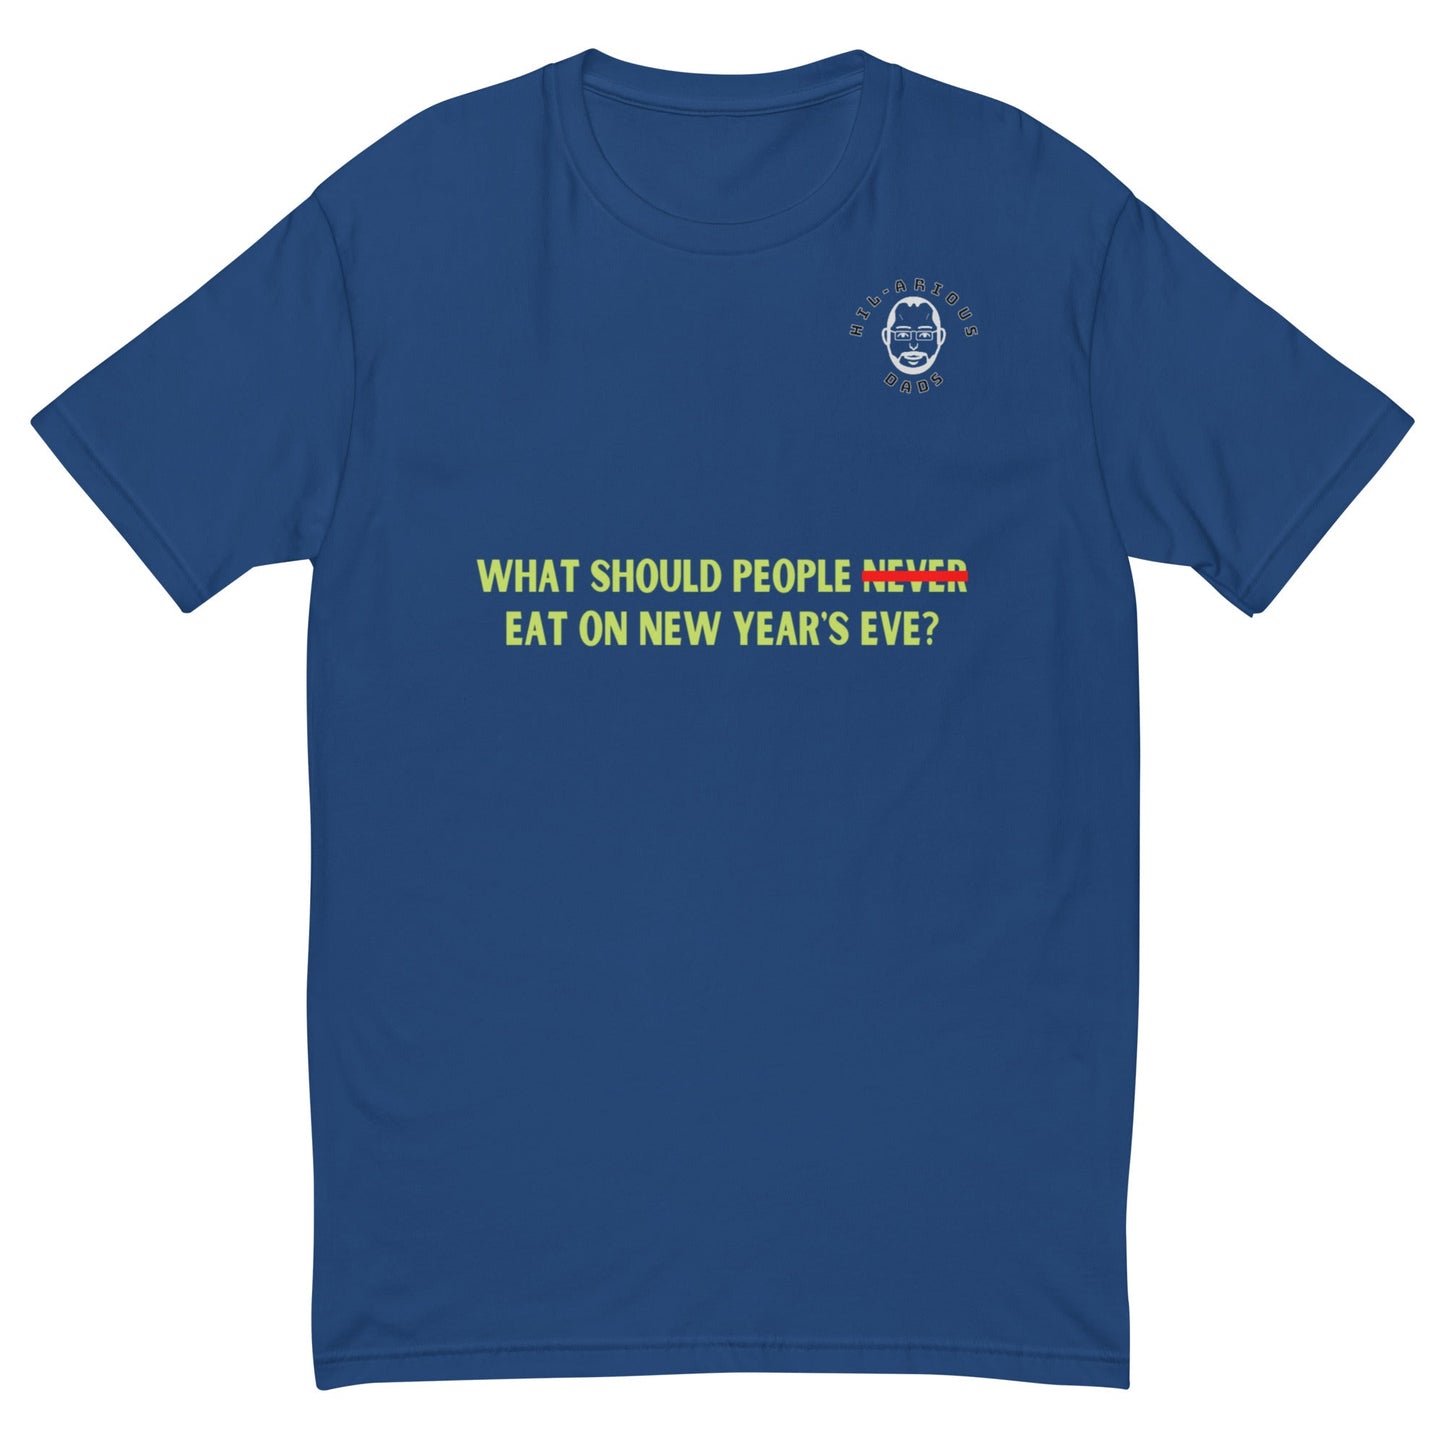 What should people NEVER eat on New Year's Eve?-T-shirt - Hil-arious Dads